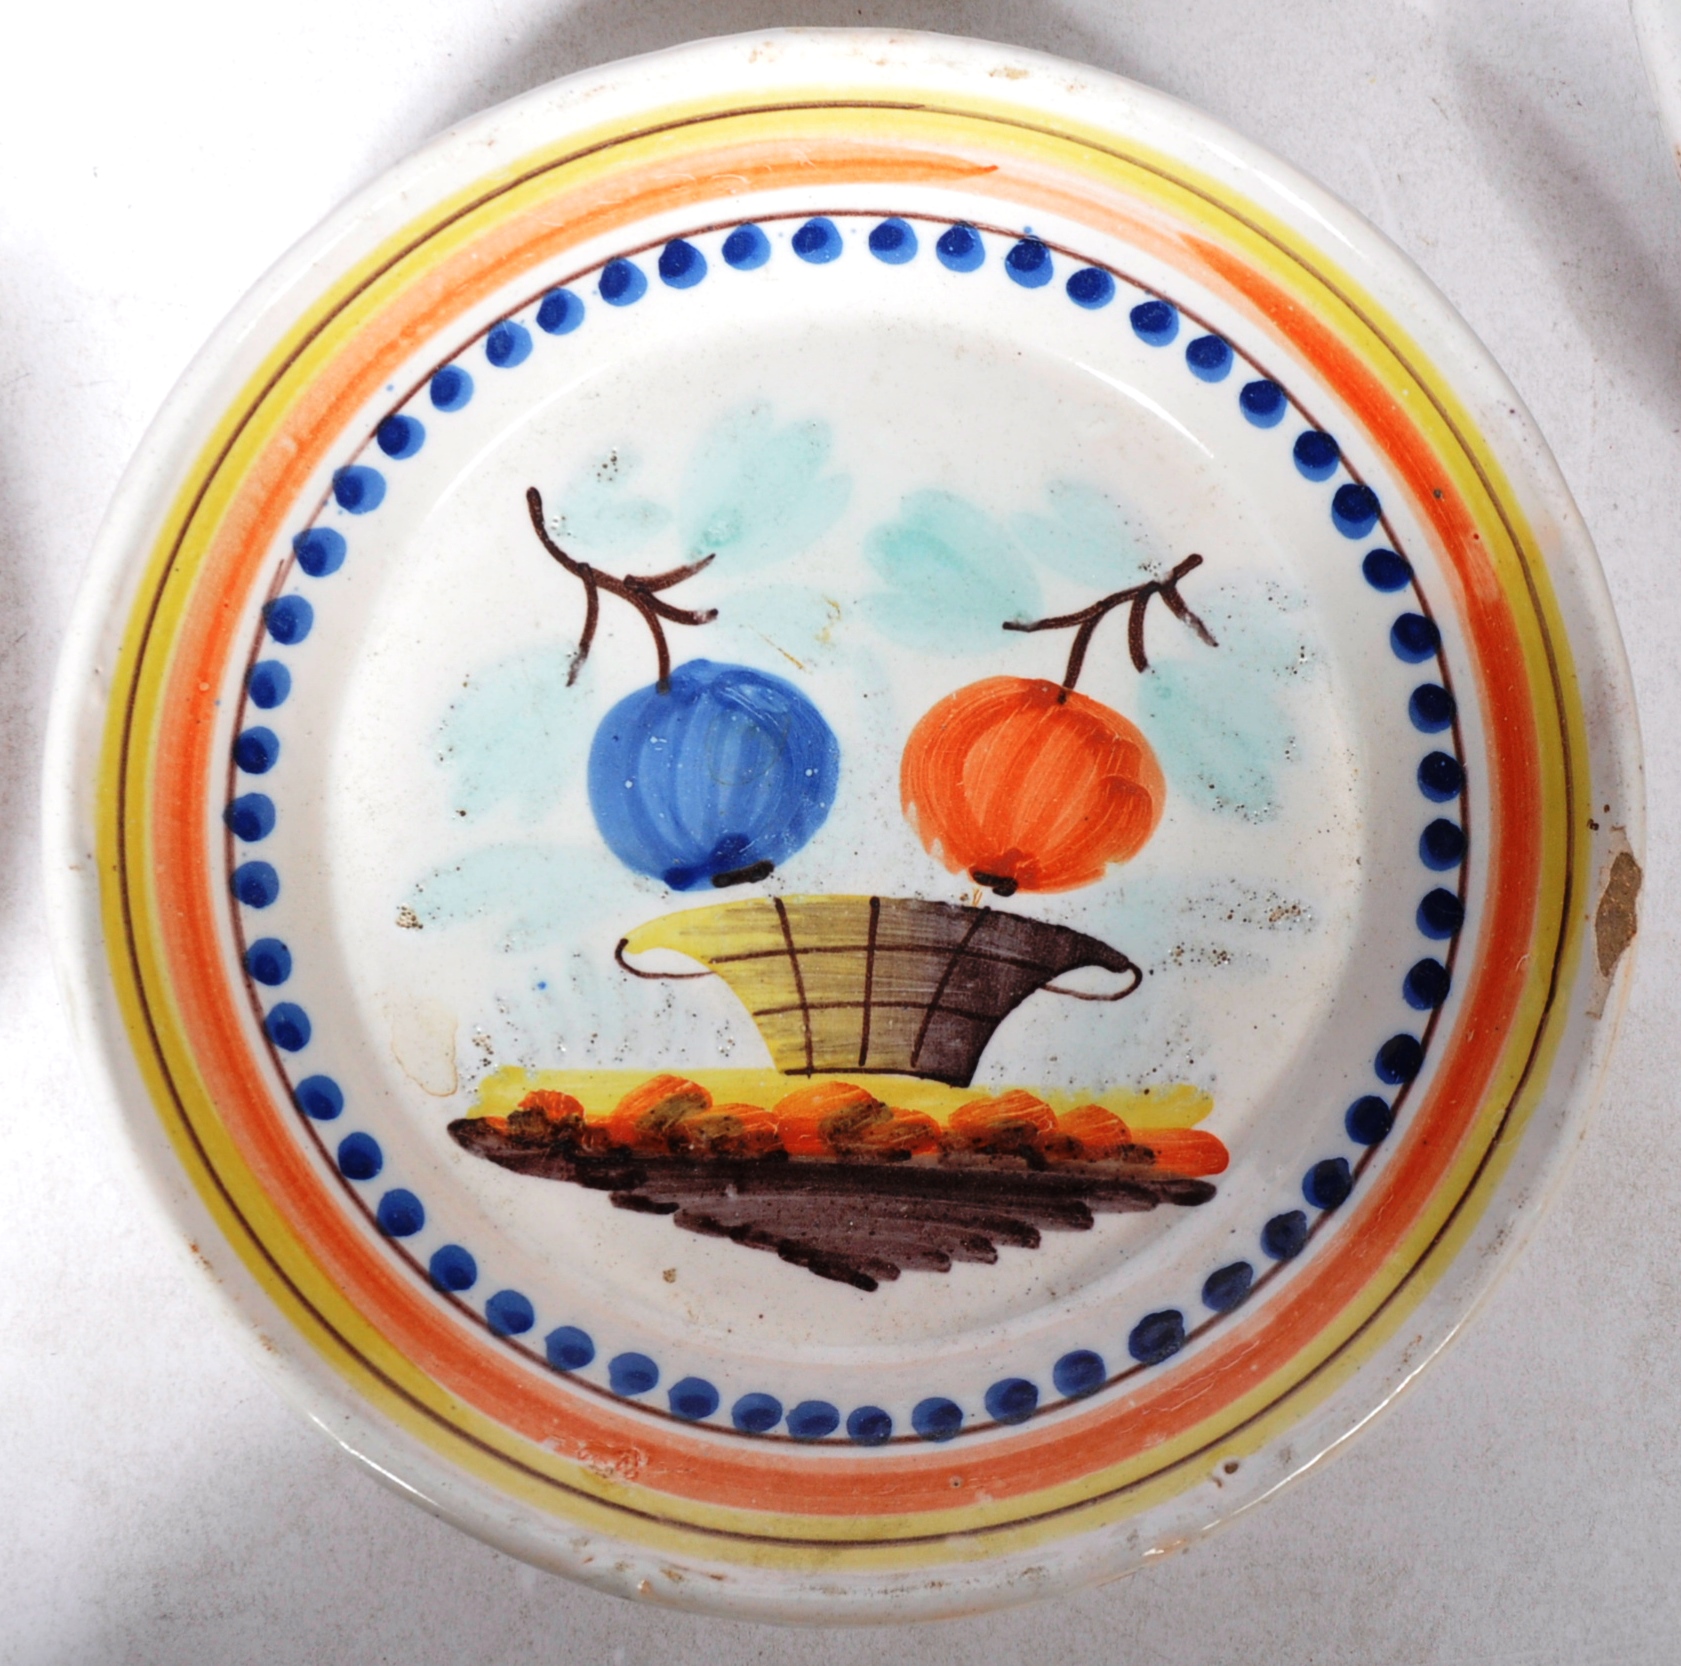 SELECTION OF 18TH / 19TH FRENCH FAIENCE TIN GLAZED PLATES - Image 7 of 10